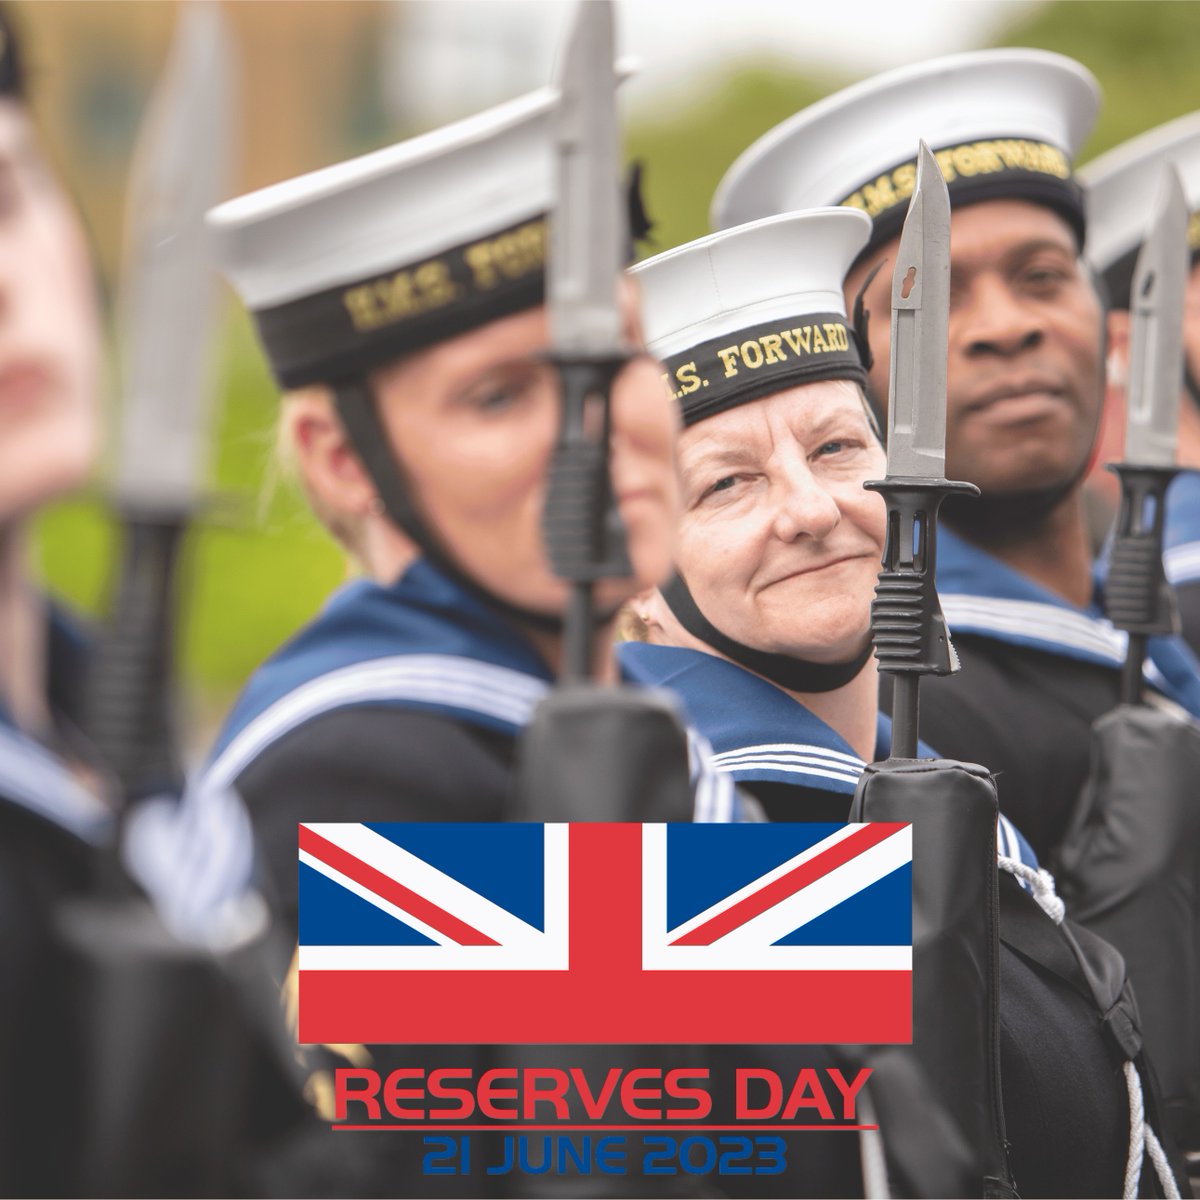 Today is #ReservesDay - recognising the valuable contribution Reservists make to our Armed Forces. We thank all those who give up their free time to serve our nation. 💙 

#ArmedForcesWeek #SaluteOurForces